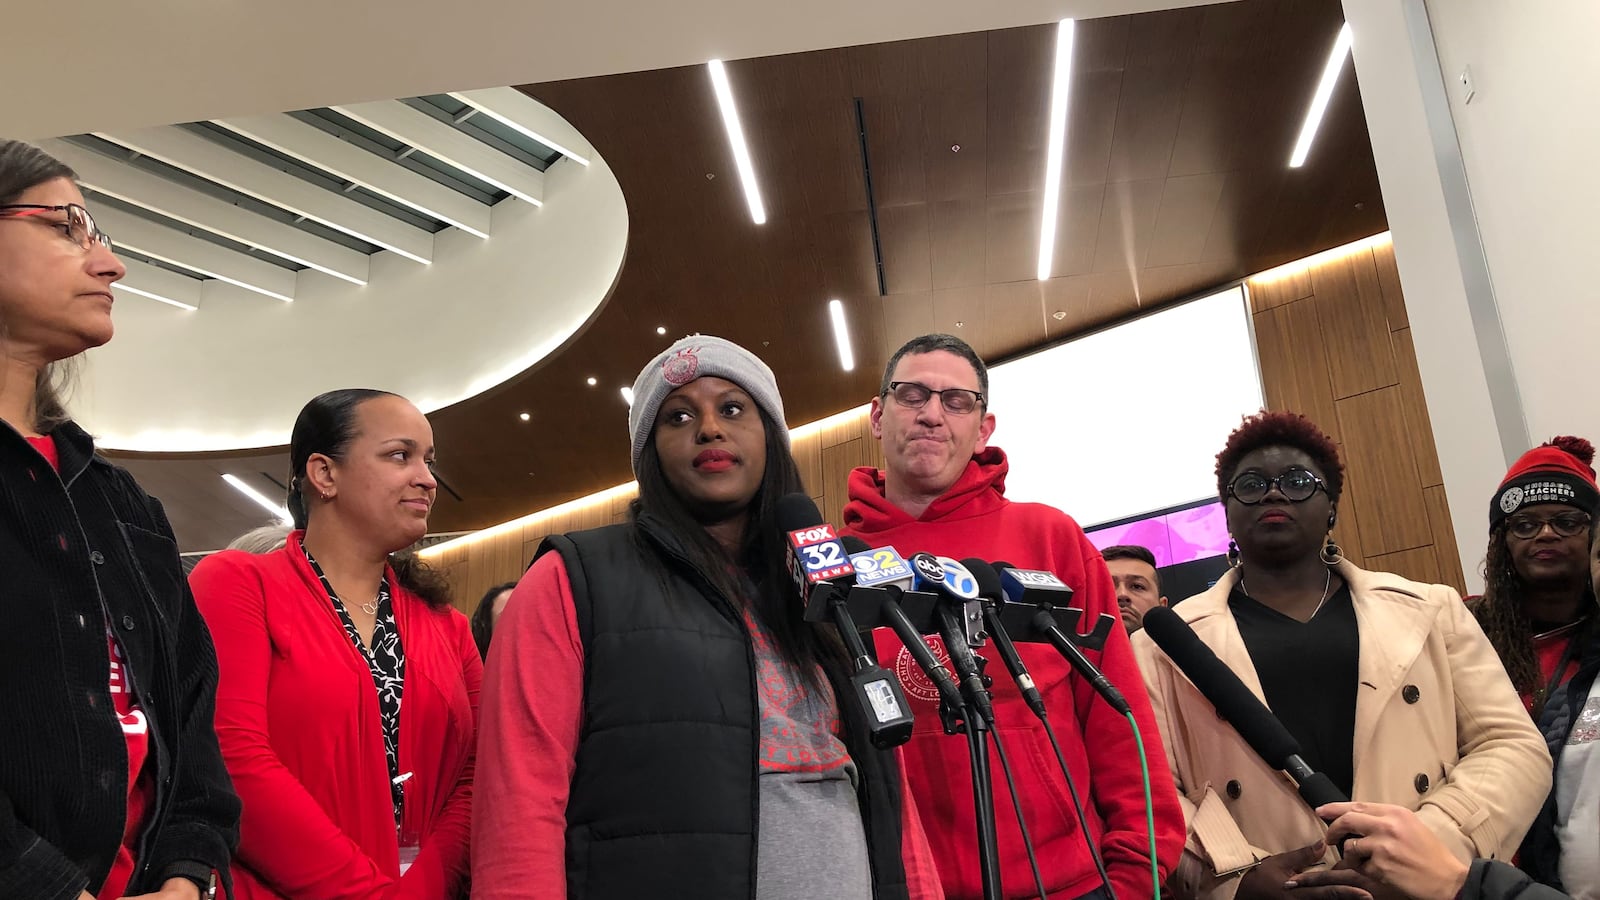 Chicago Teachers Union officers Stacy Davis Gates, second from left, and Jesse Sharkey stand among bargaining team members during a press conference after bargaining Oct. 27, 2019, at Malcolm X College.